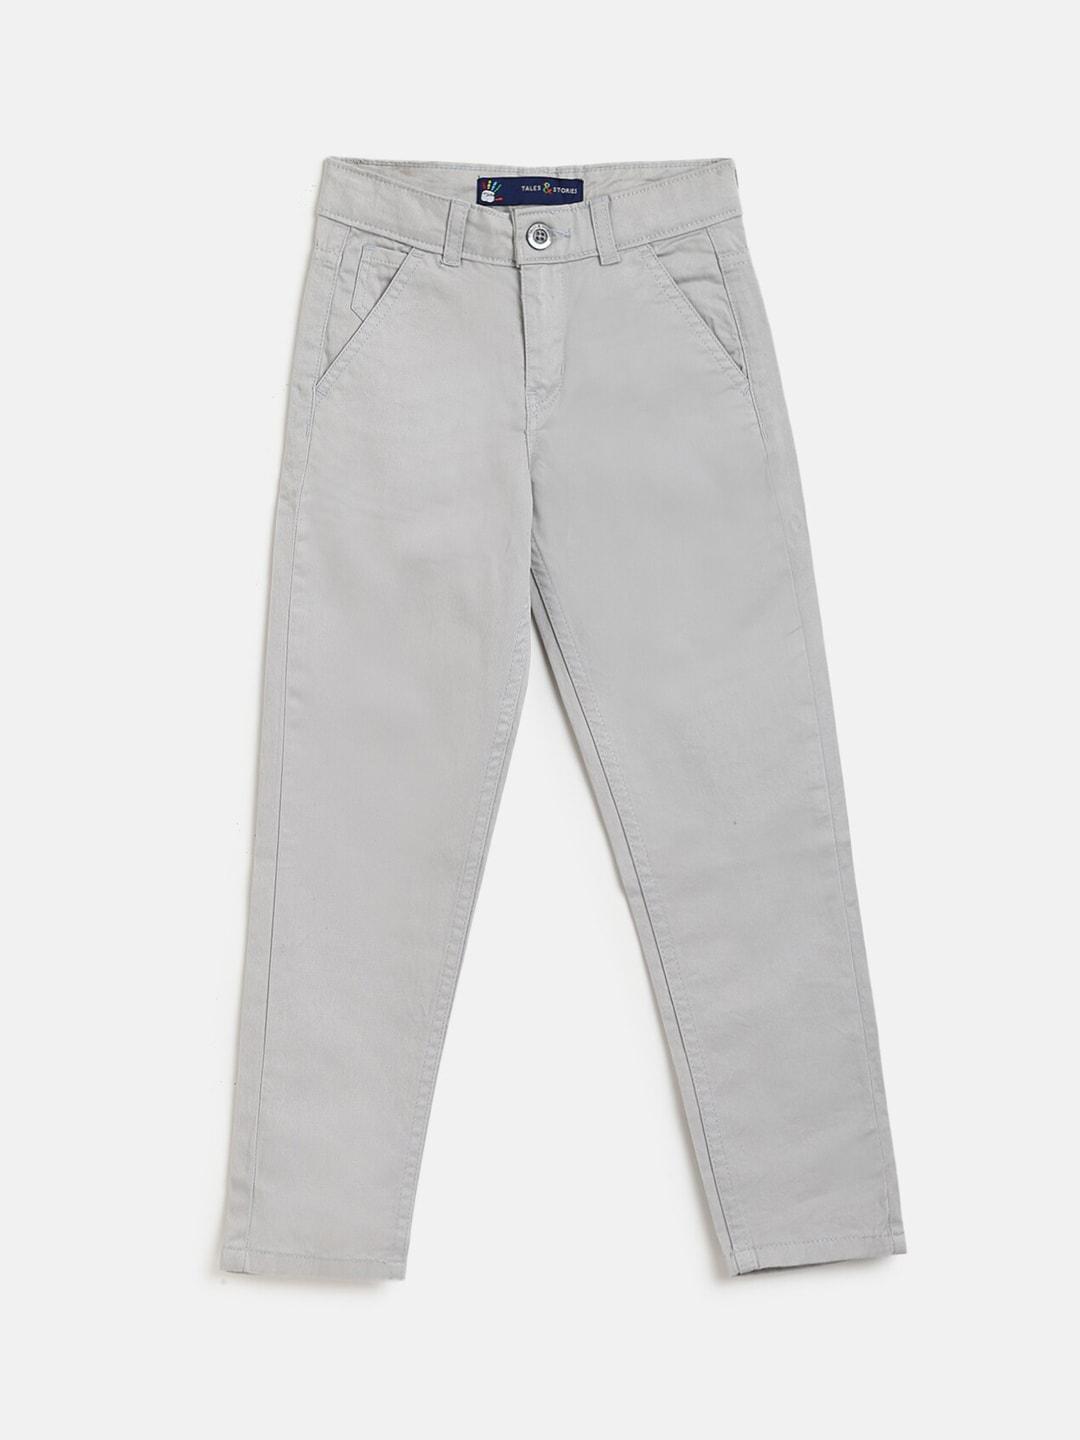 TALES & STORIES Boys Grey Slim Fit Chinos Trousers